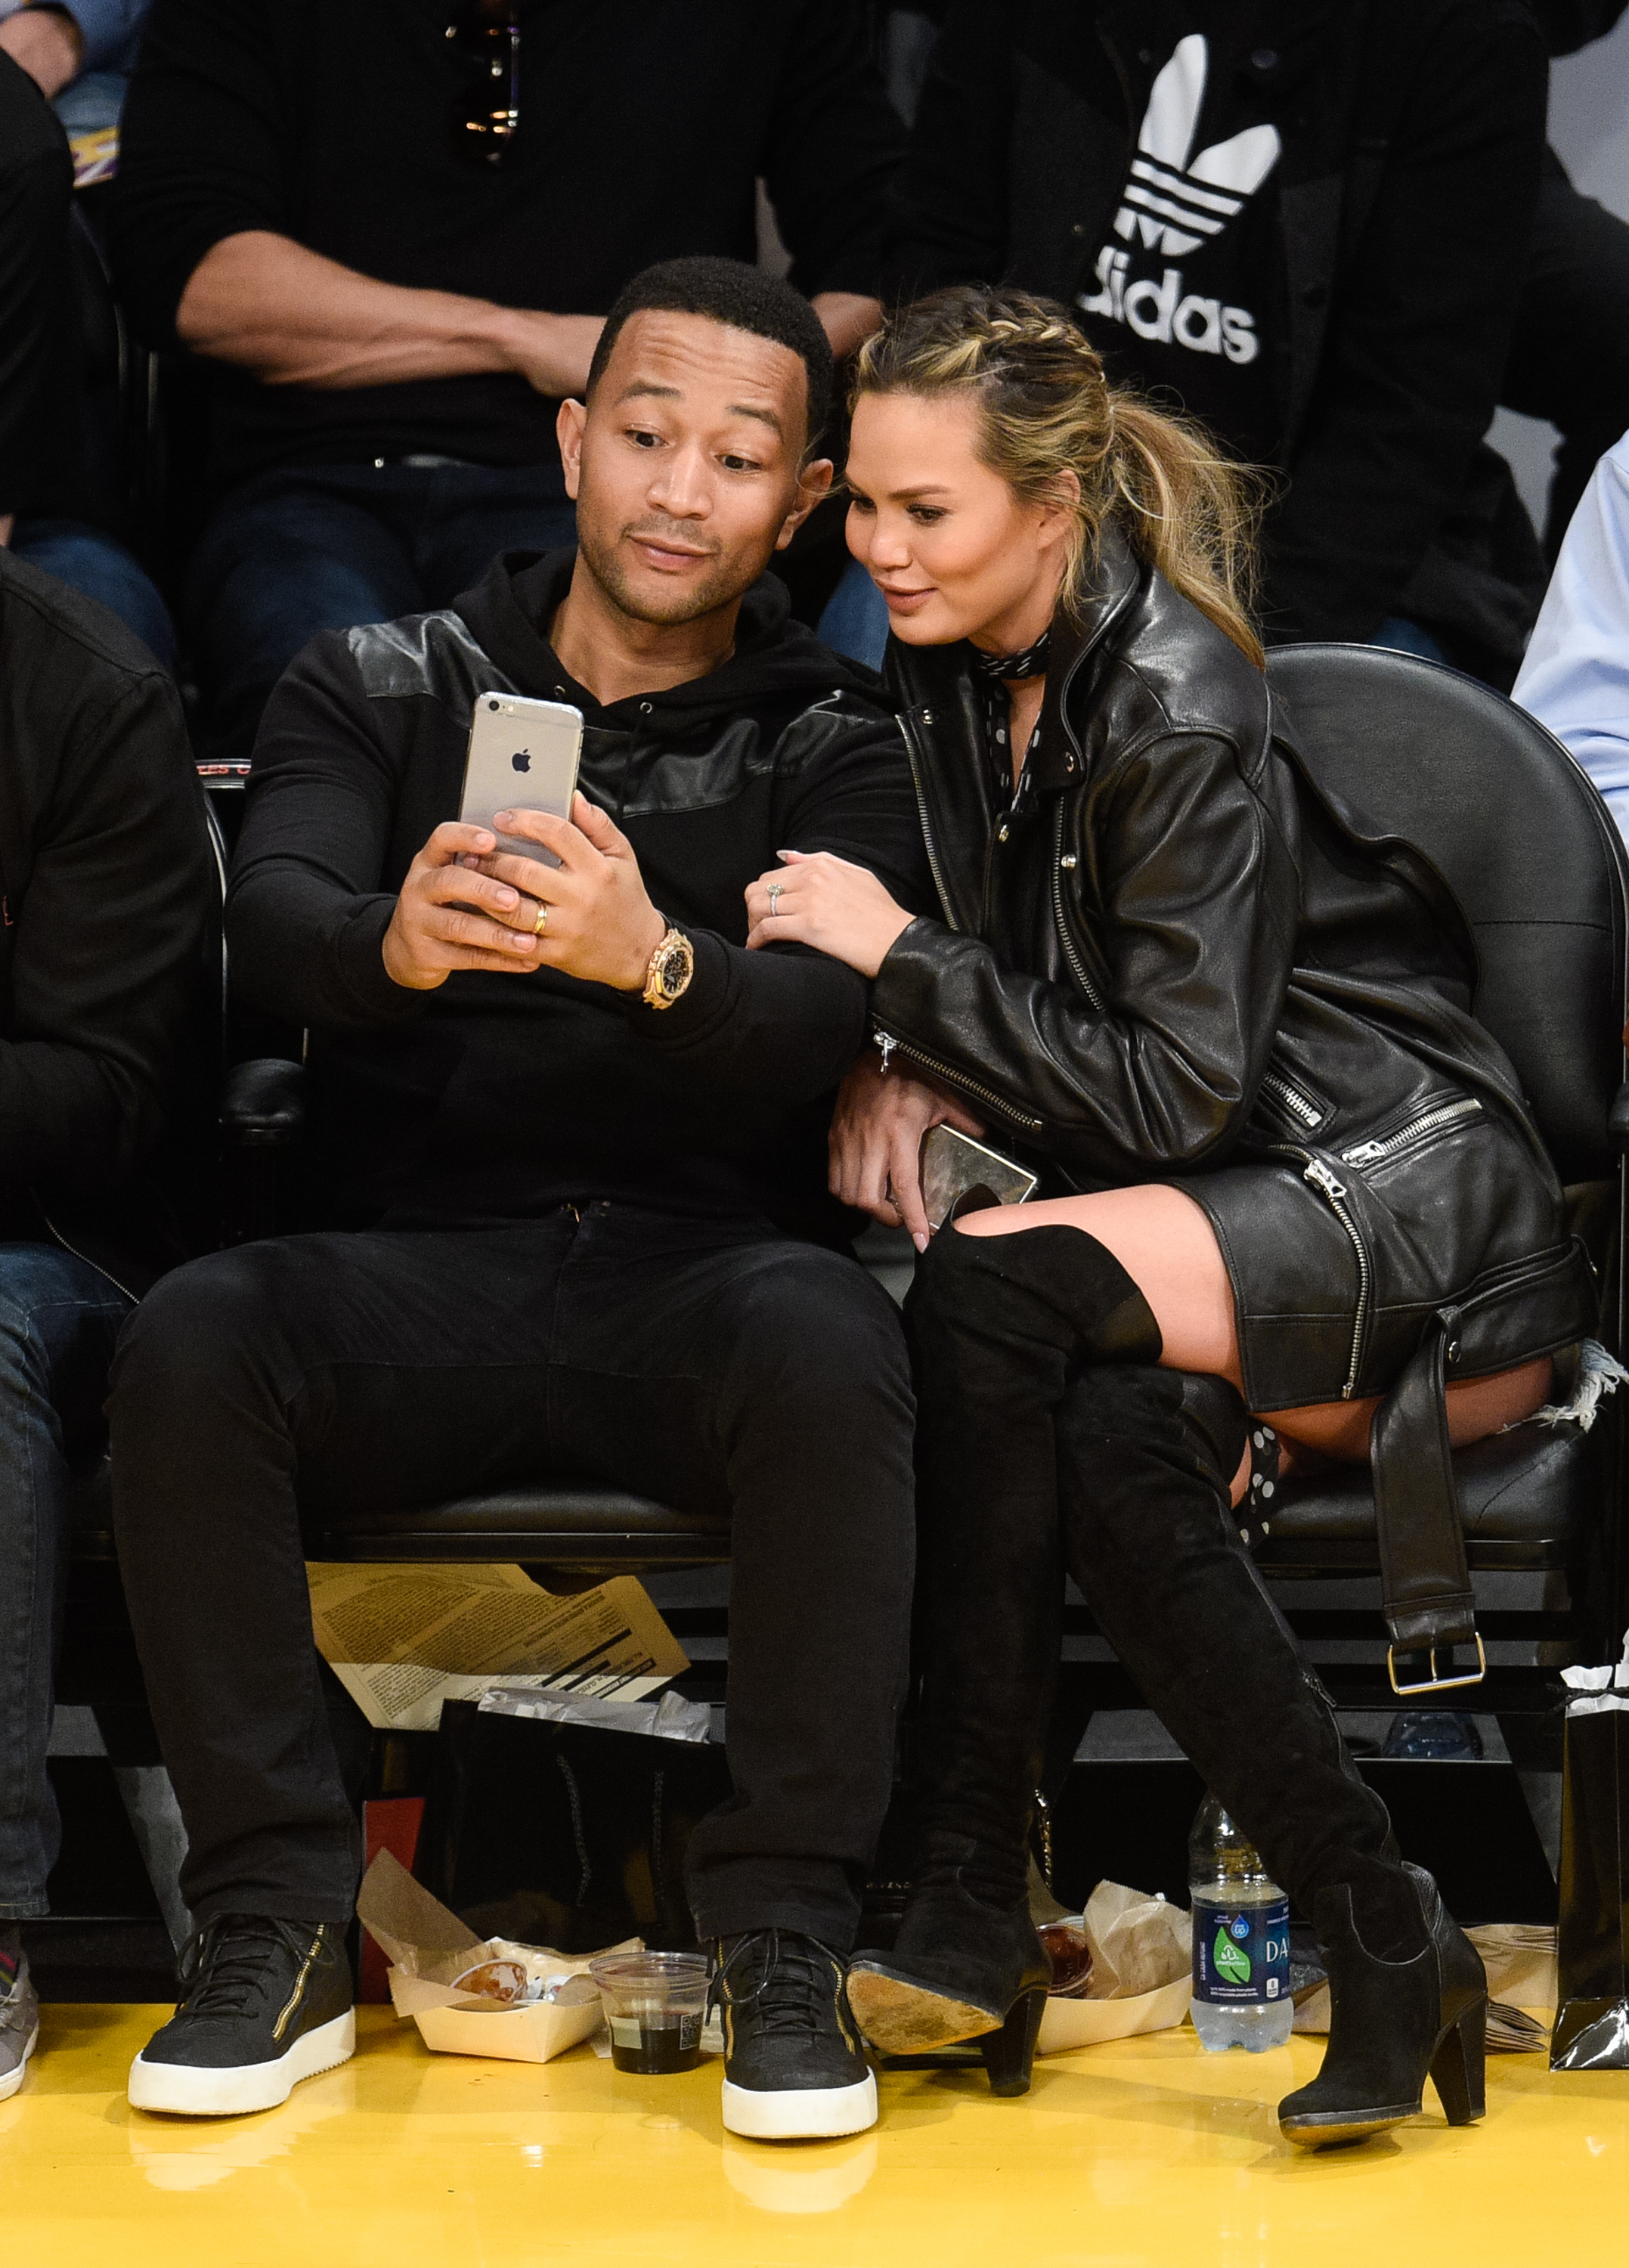 John Legend and Chrissy Teigen at a basketball game in Los Angeles on March 10, 2016. (Noel Vasquez—GC Images)